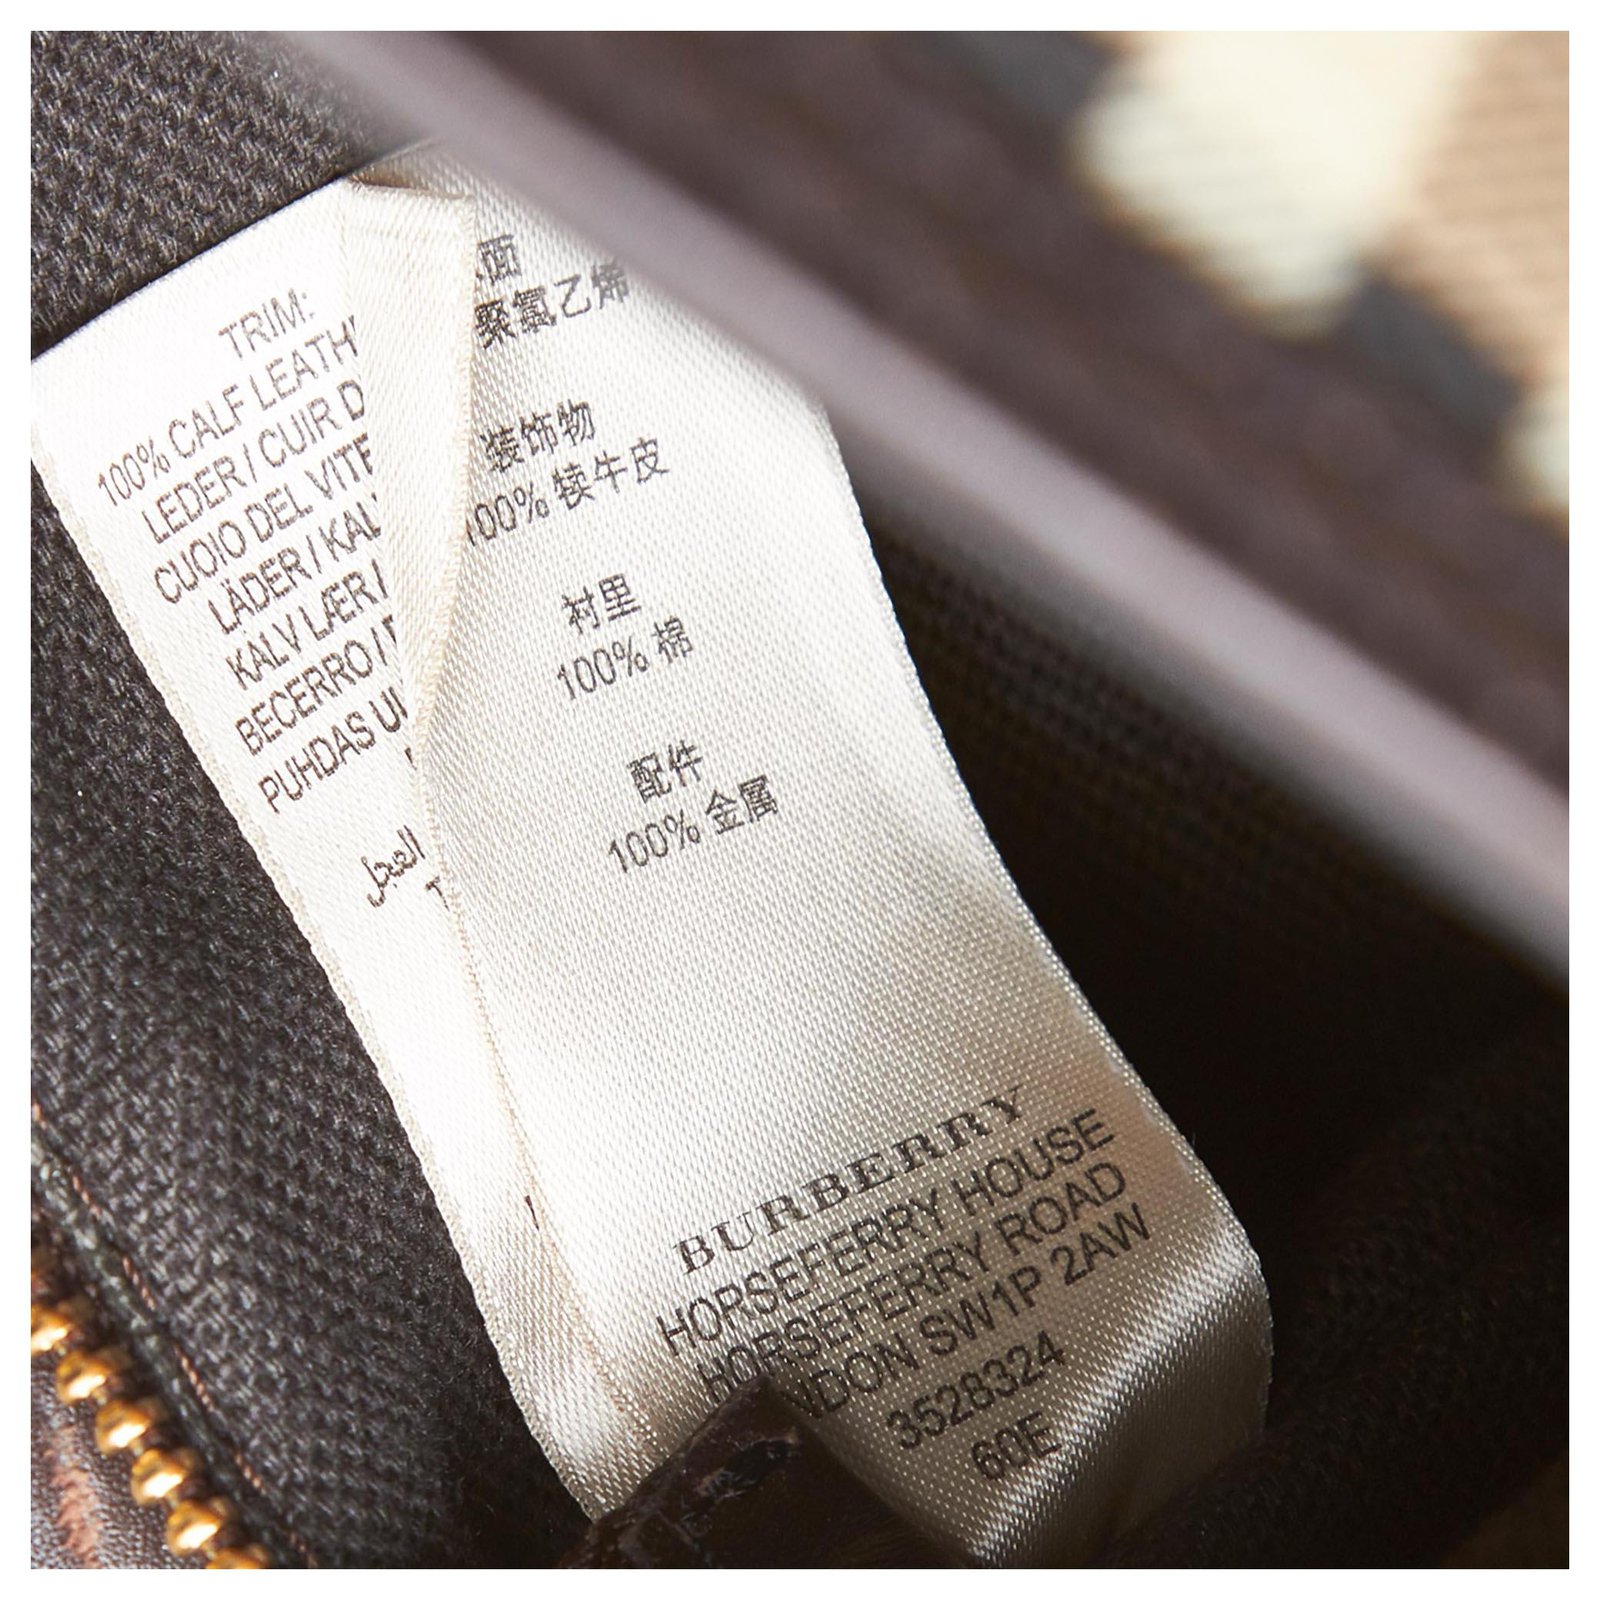 burberry serial number verification